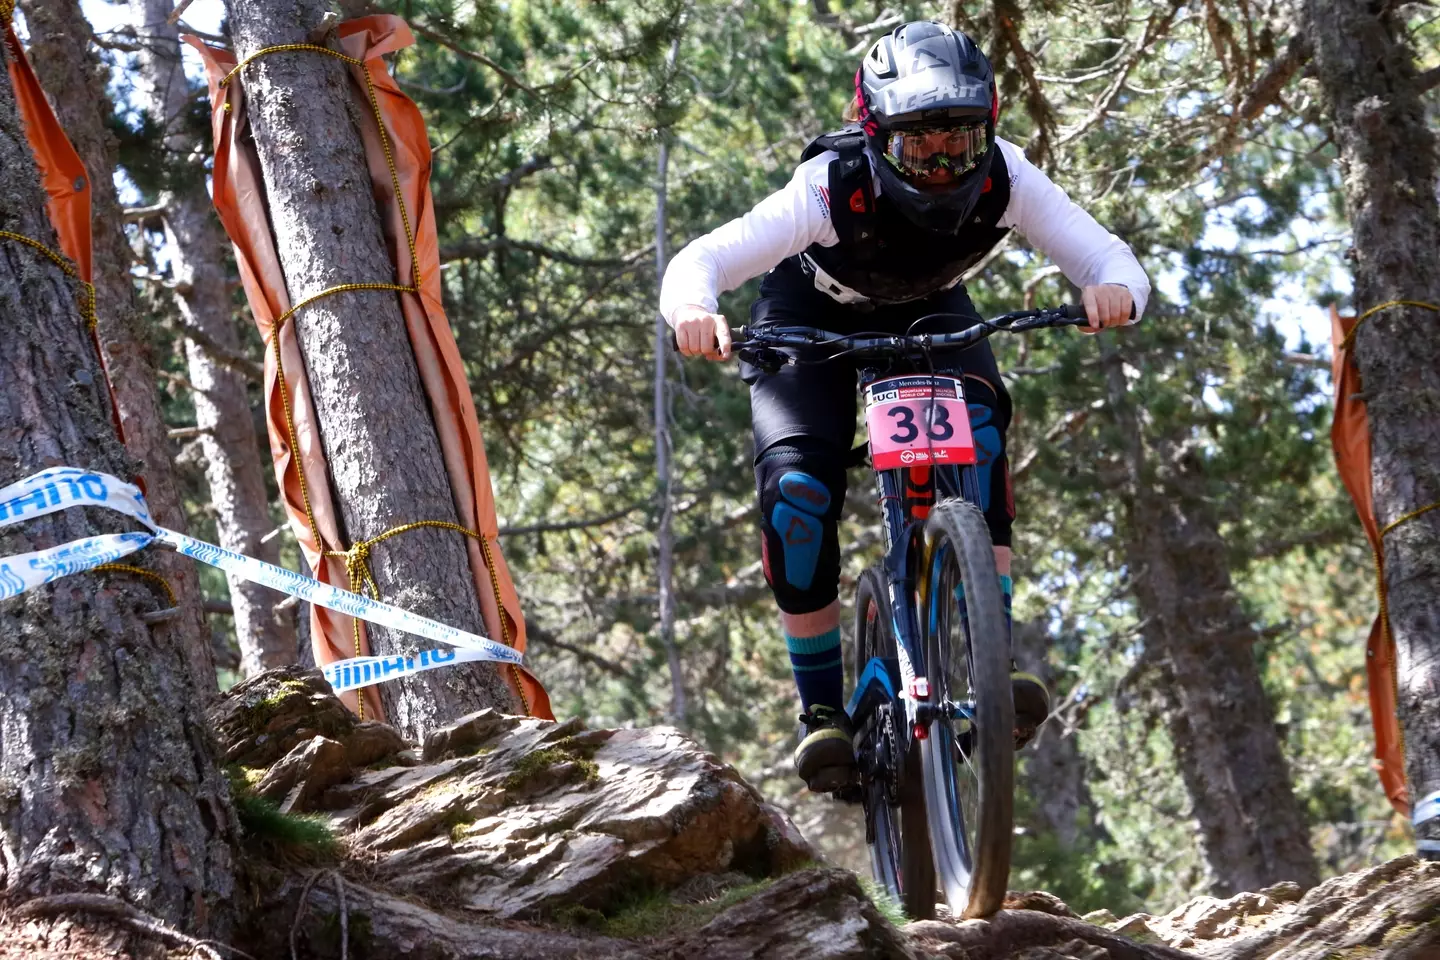 Mountain biker Kate Weatherly has spoken out against new sporting rules restricting trans athletes from competing in women's sports.